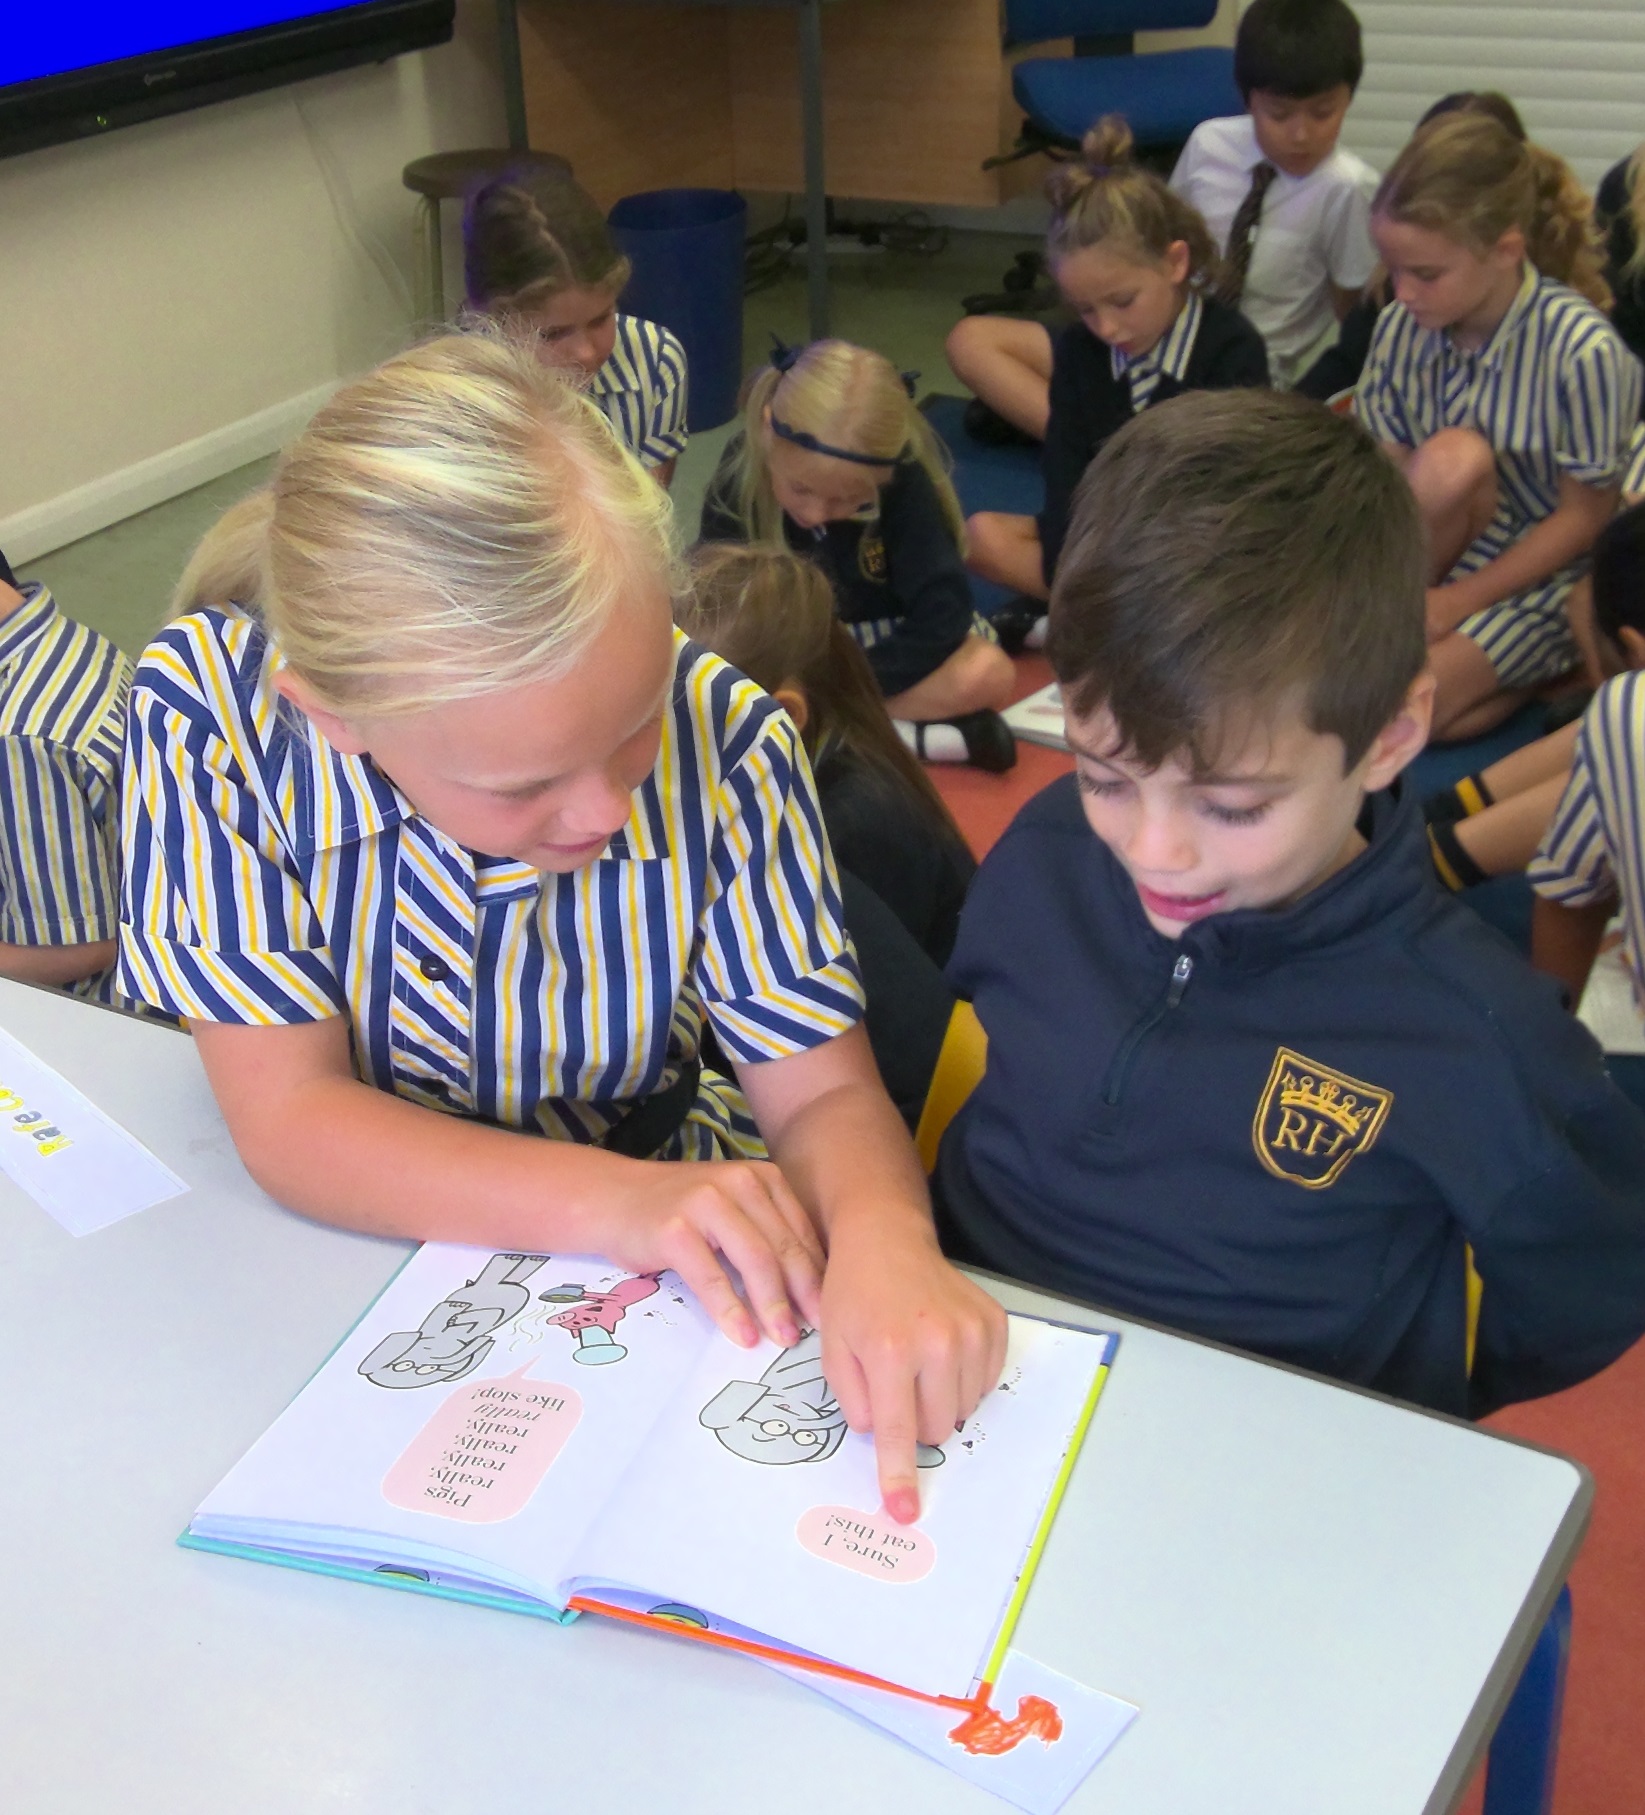 Year 5 child reading to a Year 2 child